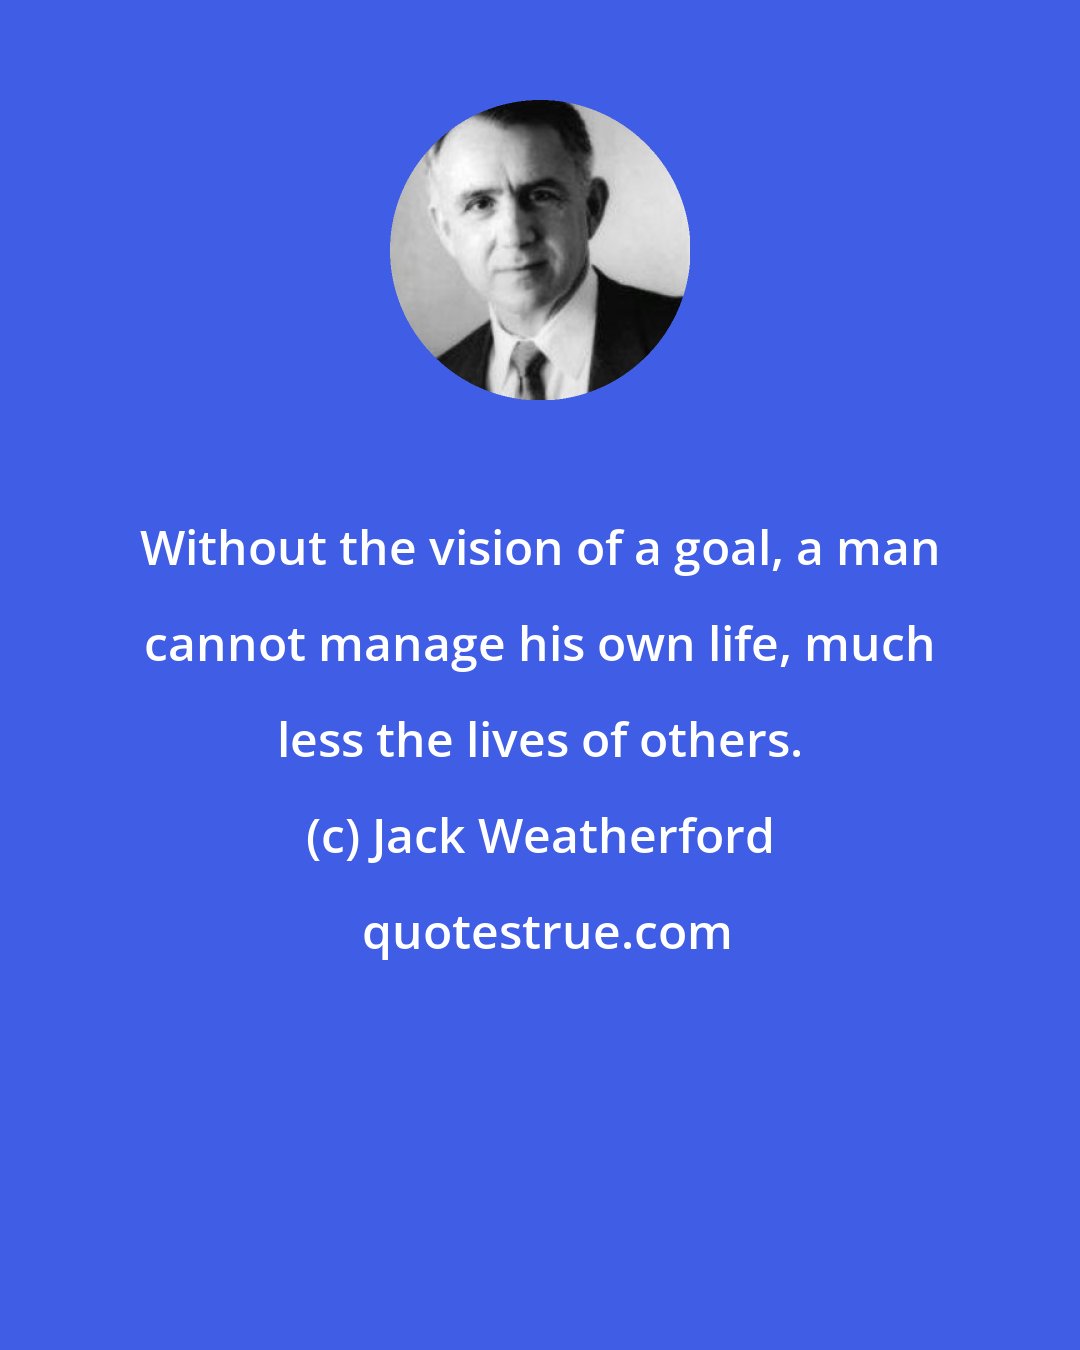 Jack Weatherford: Without the vision of a goal, a man cannot manage his own life, much less the lives of others.